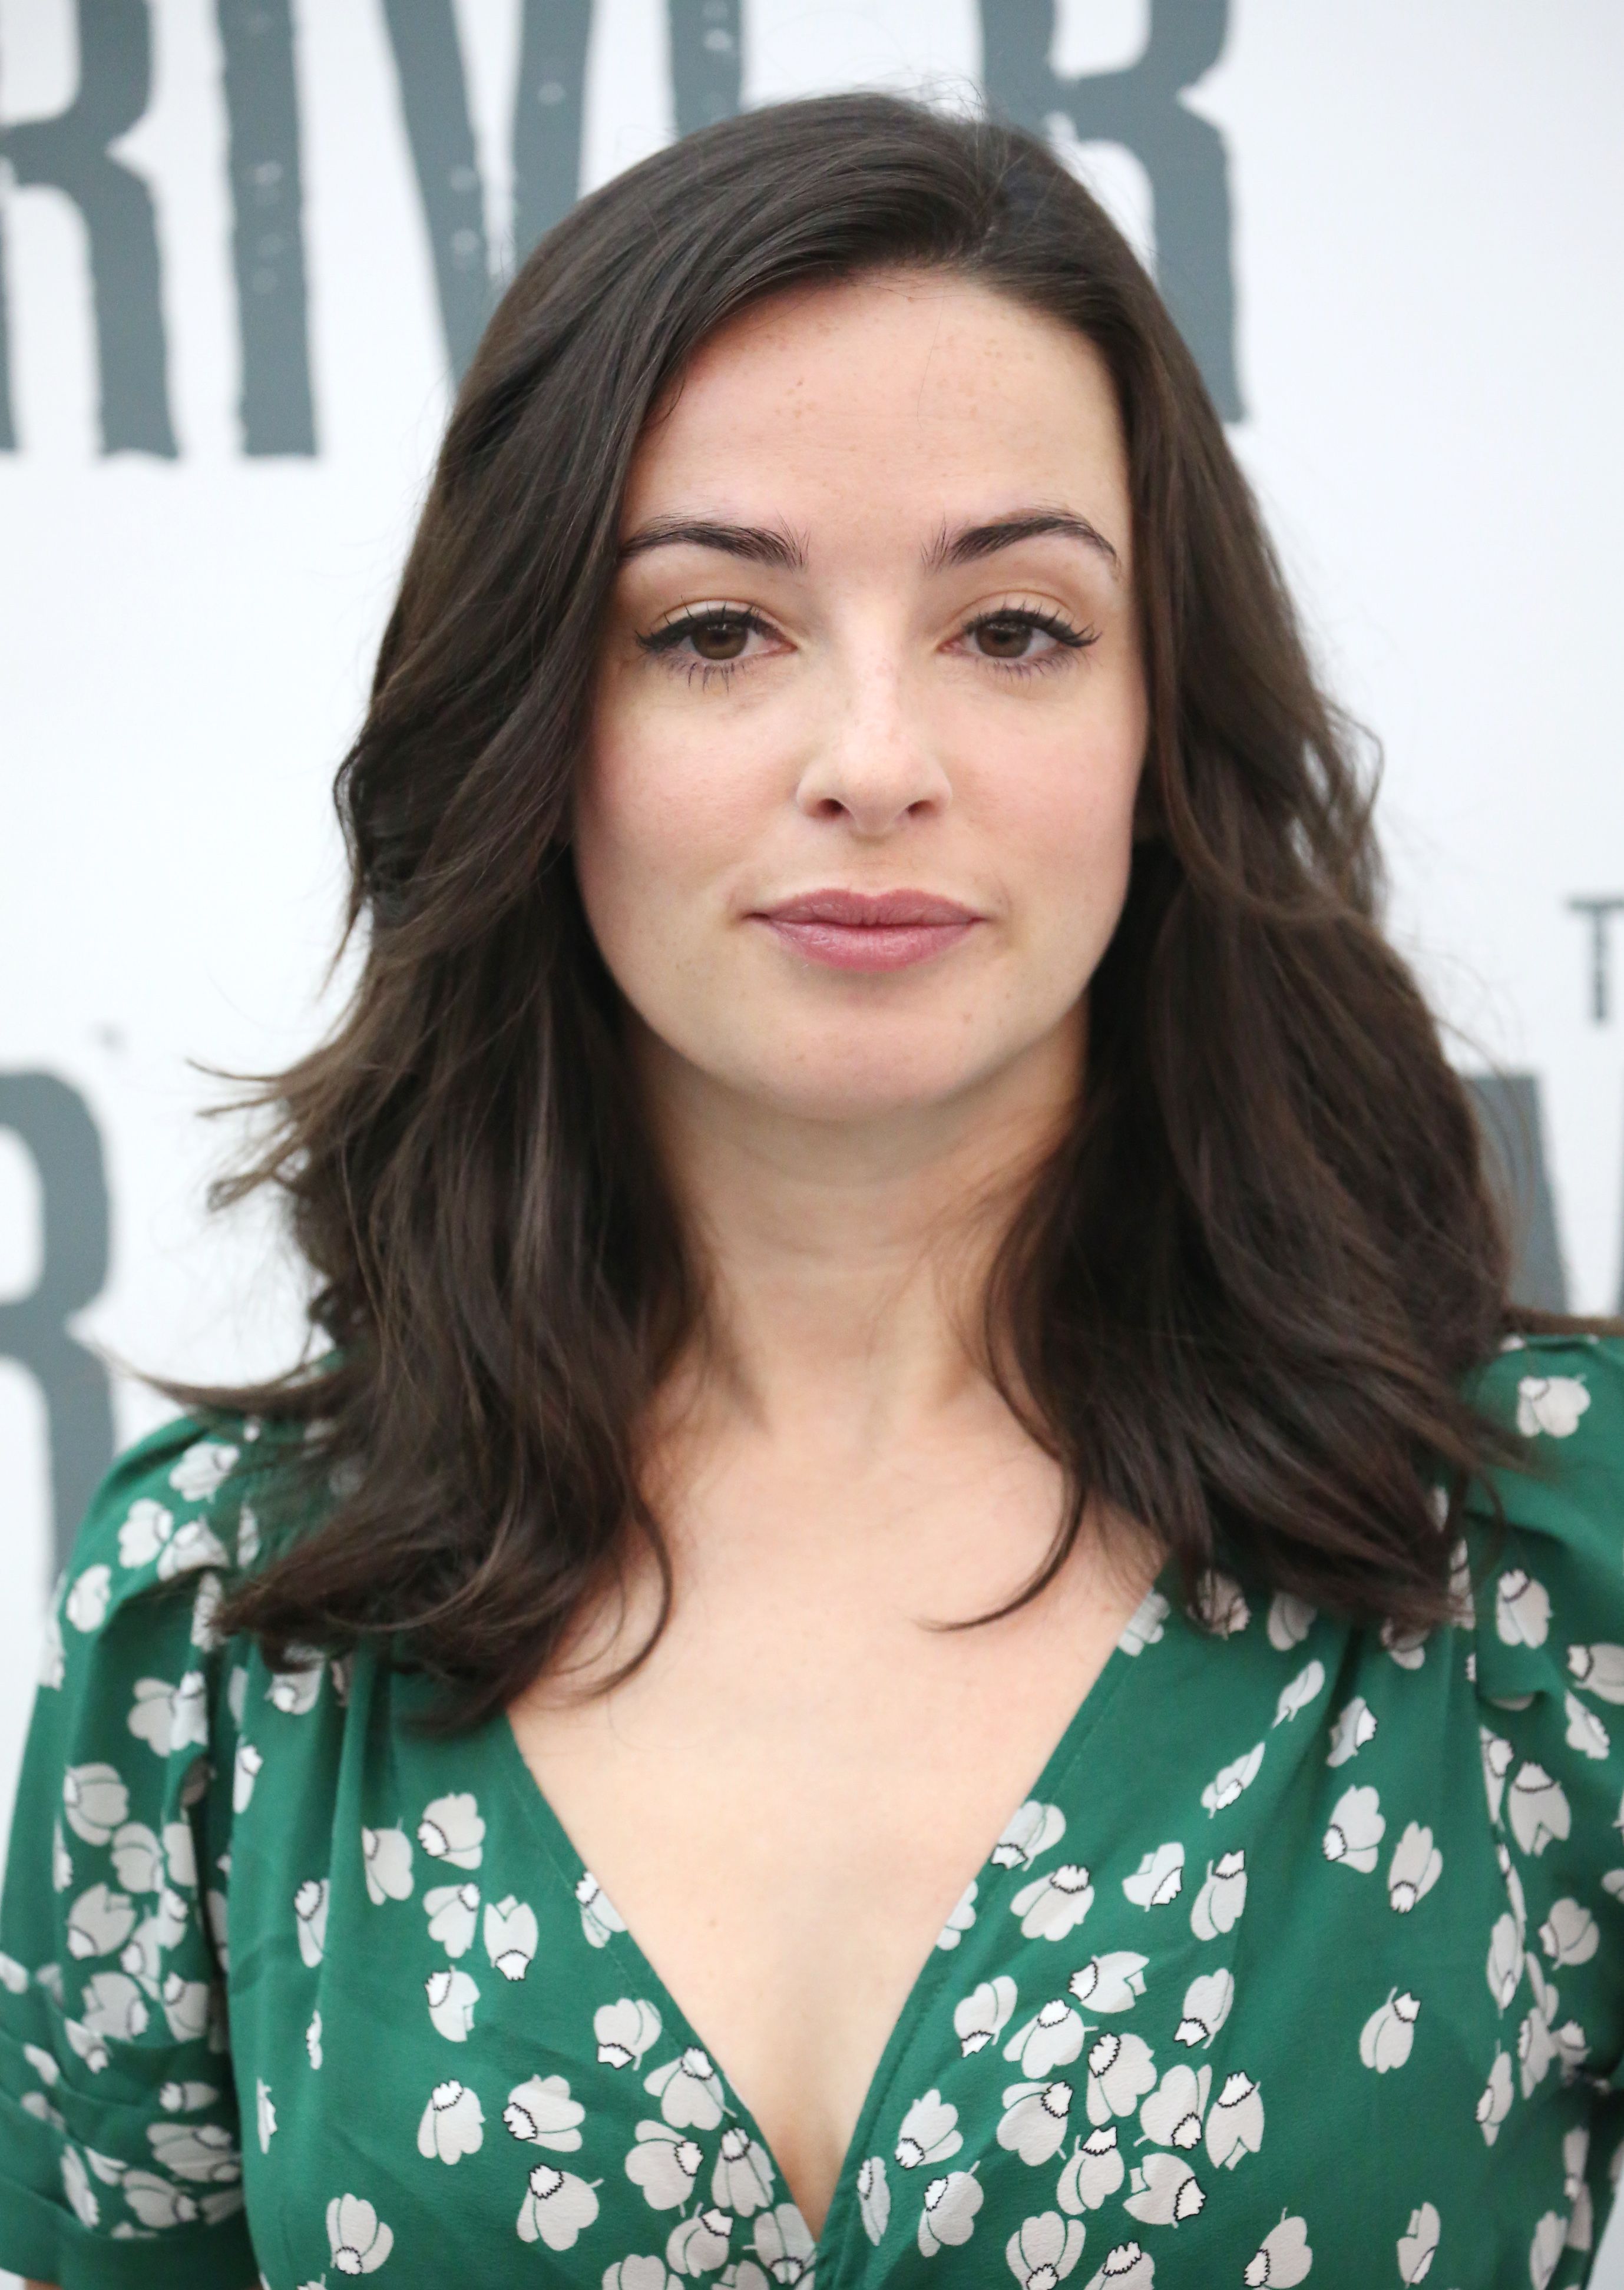  Laura Donnelly at the rehearsal studio for 'The River' in 2014 in New York | Source: Getty Images